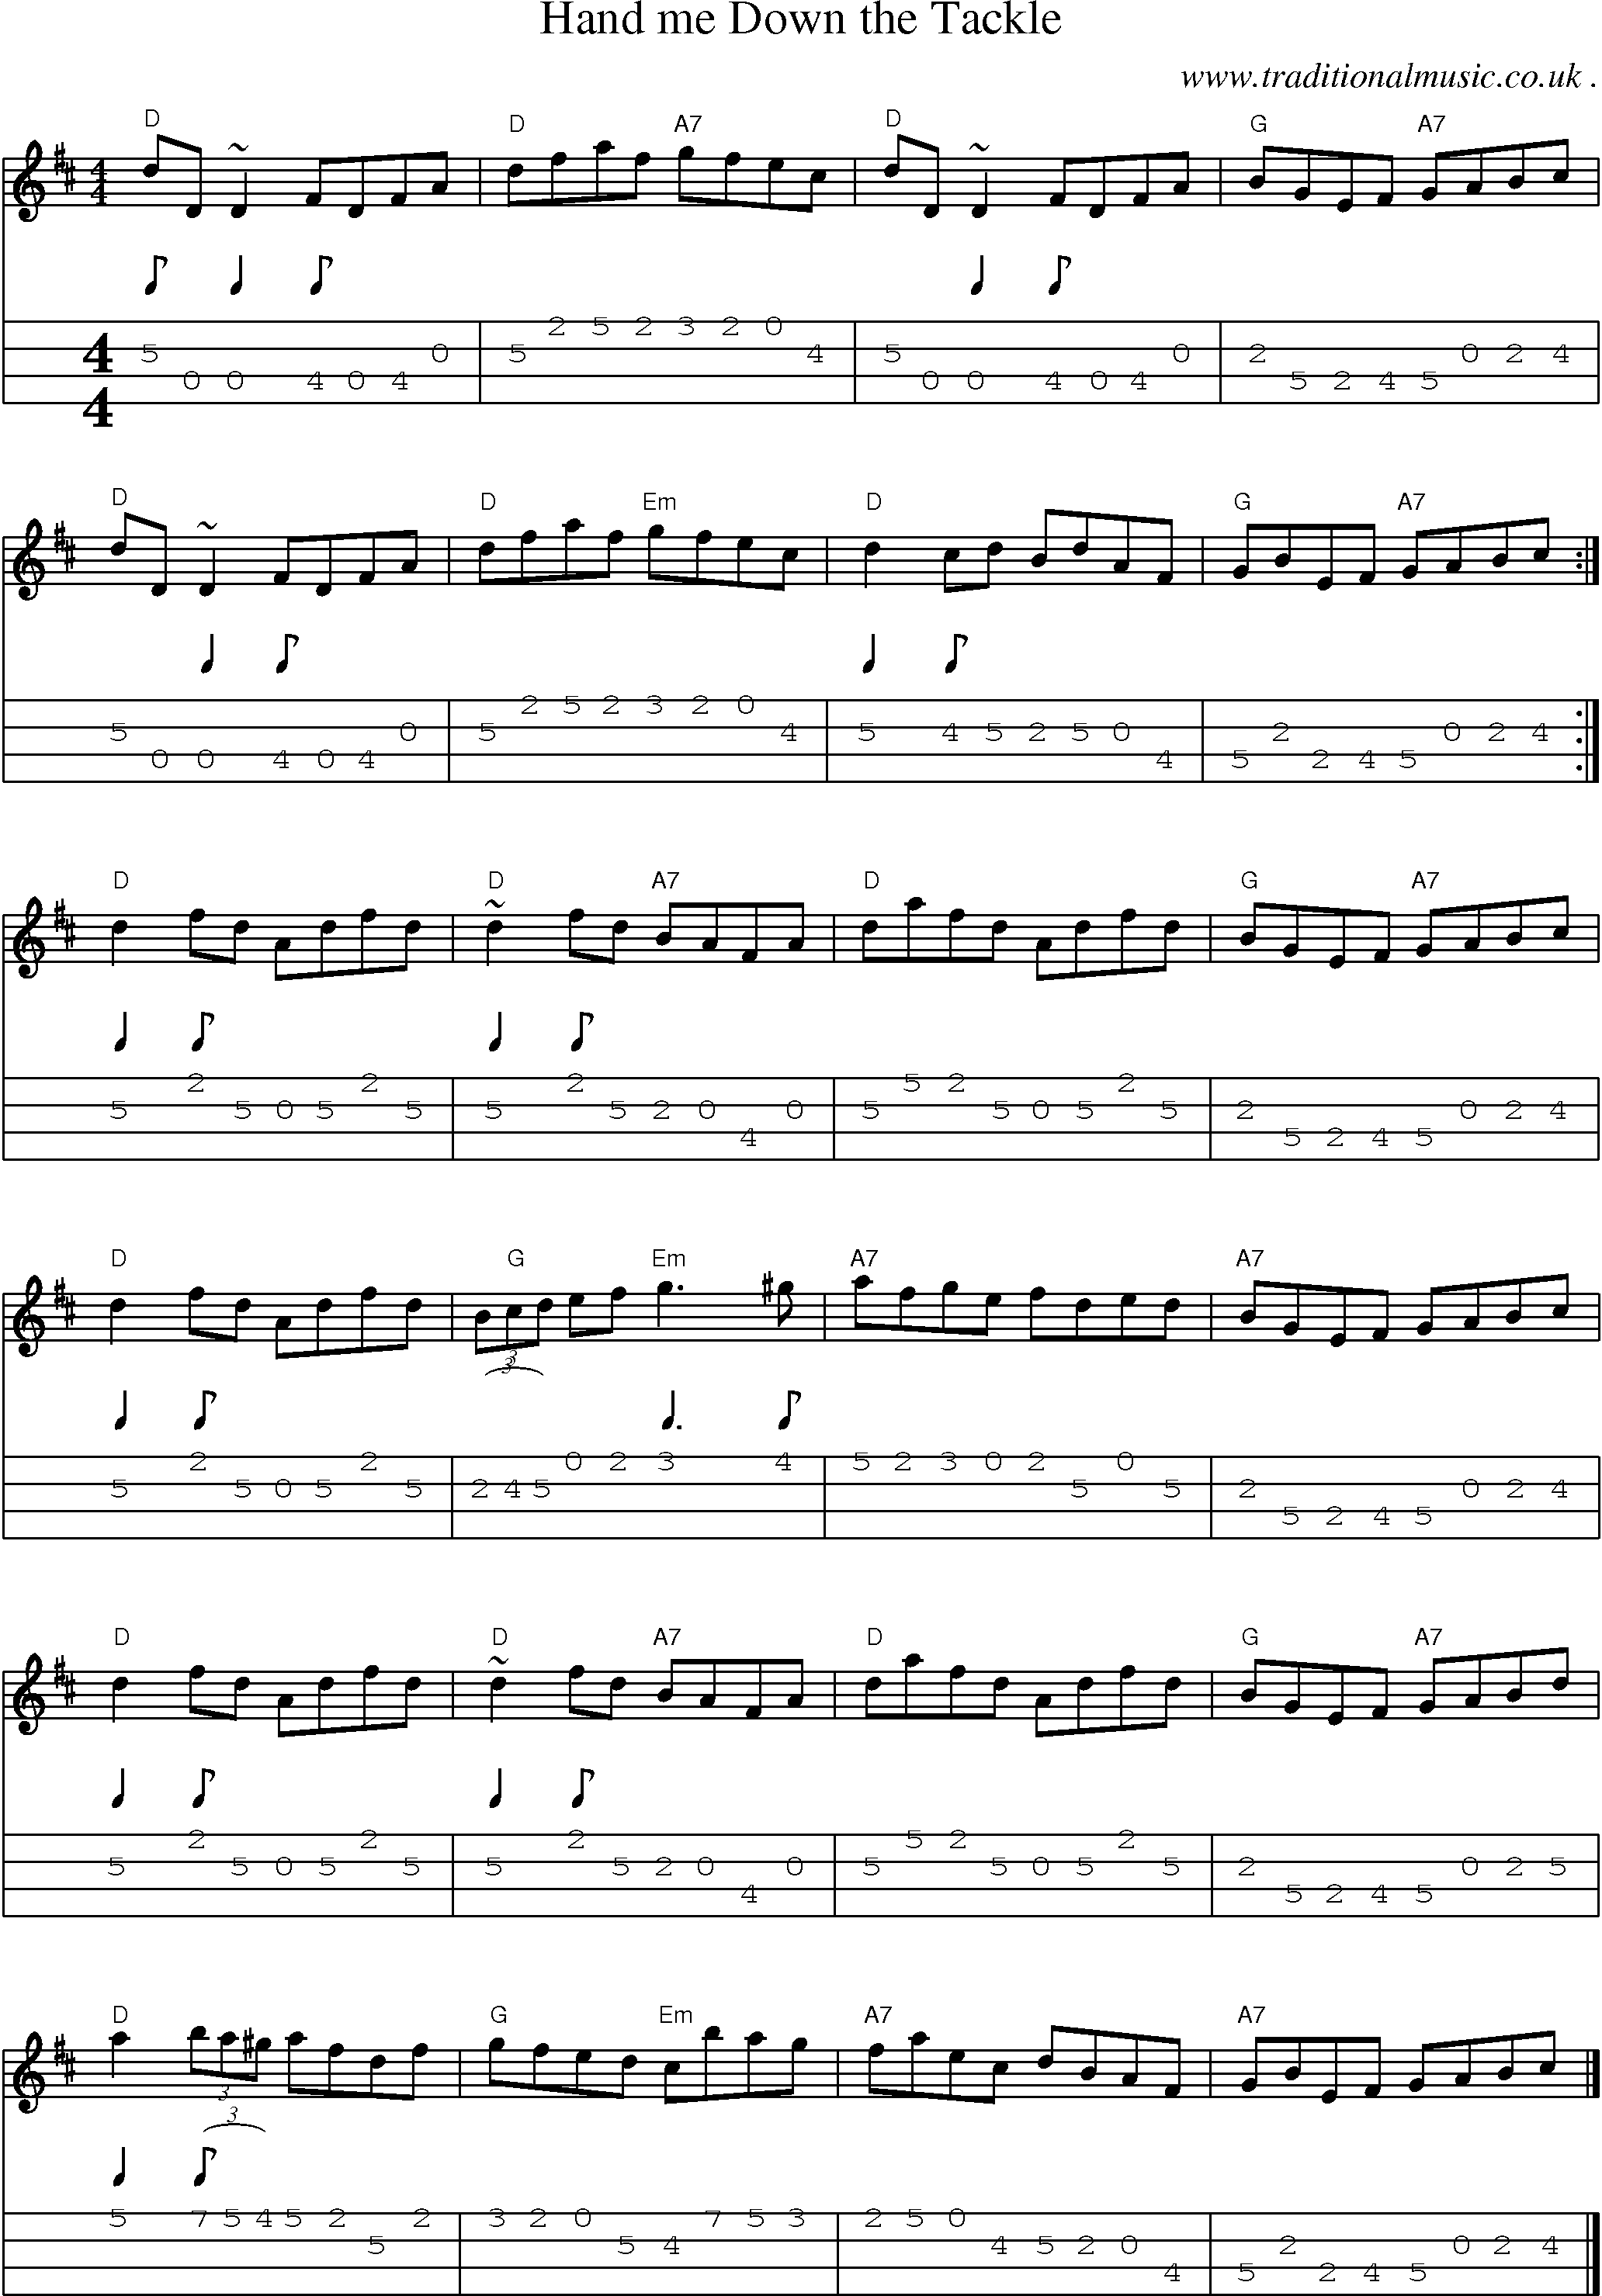 Sheet-music  score, Chords and Mandolin Tabs for Hand Me Down The Tackle